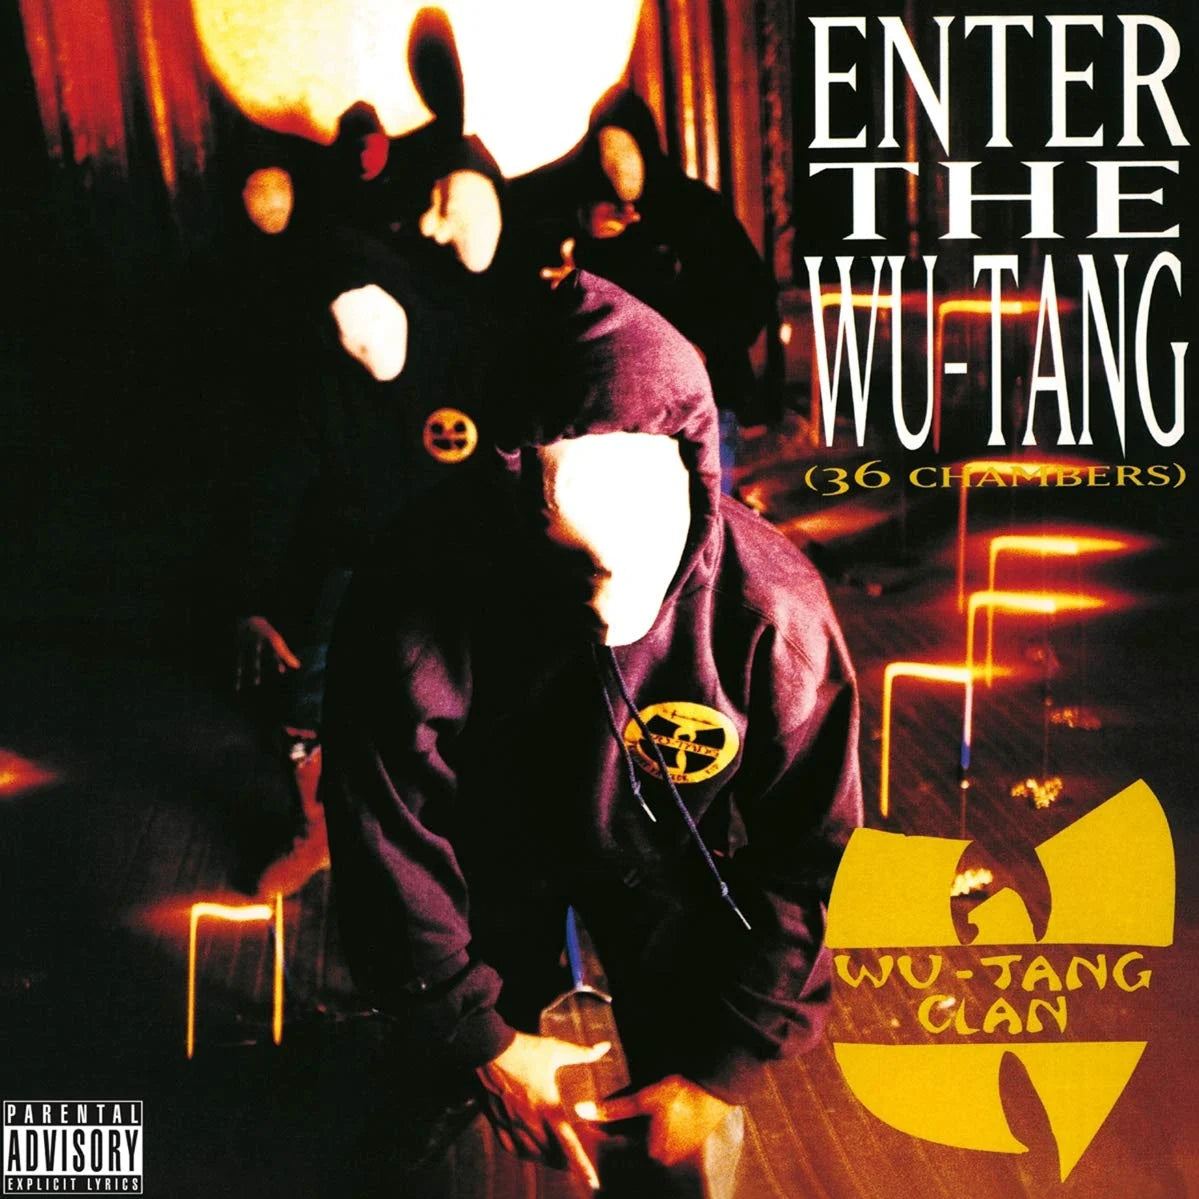 WU-TANG CLAN - Enter The 36 Chambers (NAD 2023) - LP - Gold Marbled Vinyl [OCT 14]